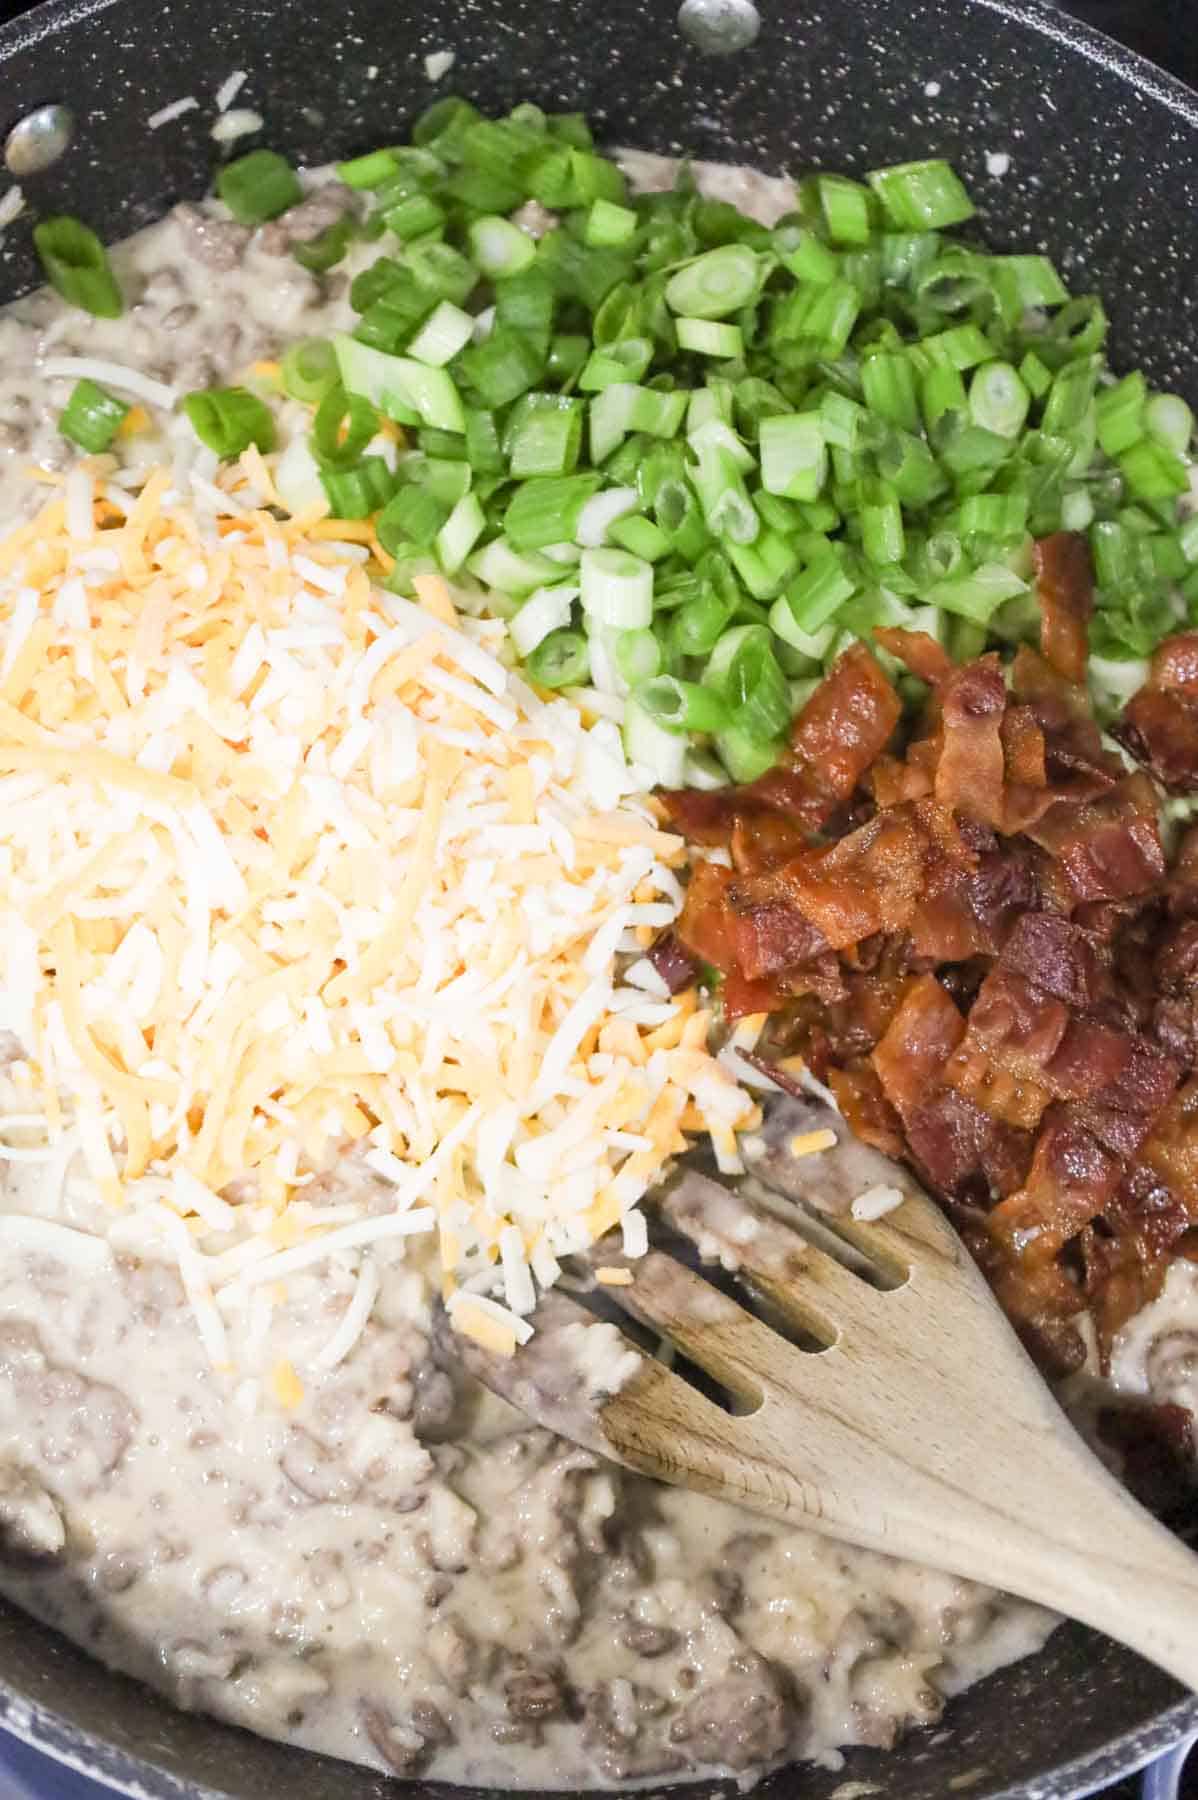 shredded cheese, chopped green onions and cooked bacon pieces on top of creamy ground beef mixture in a skillet